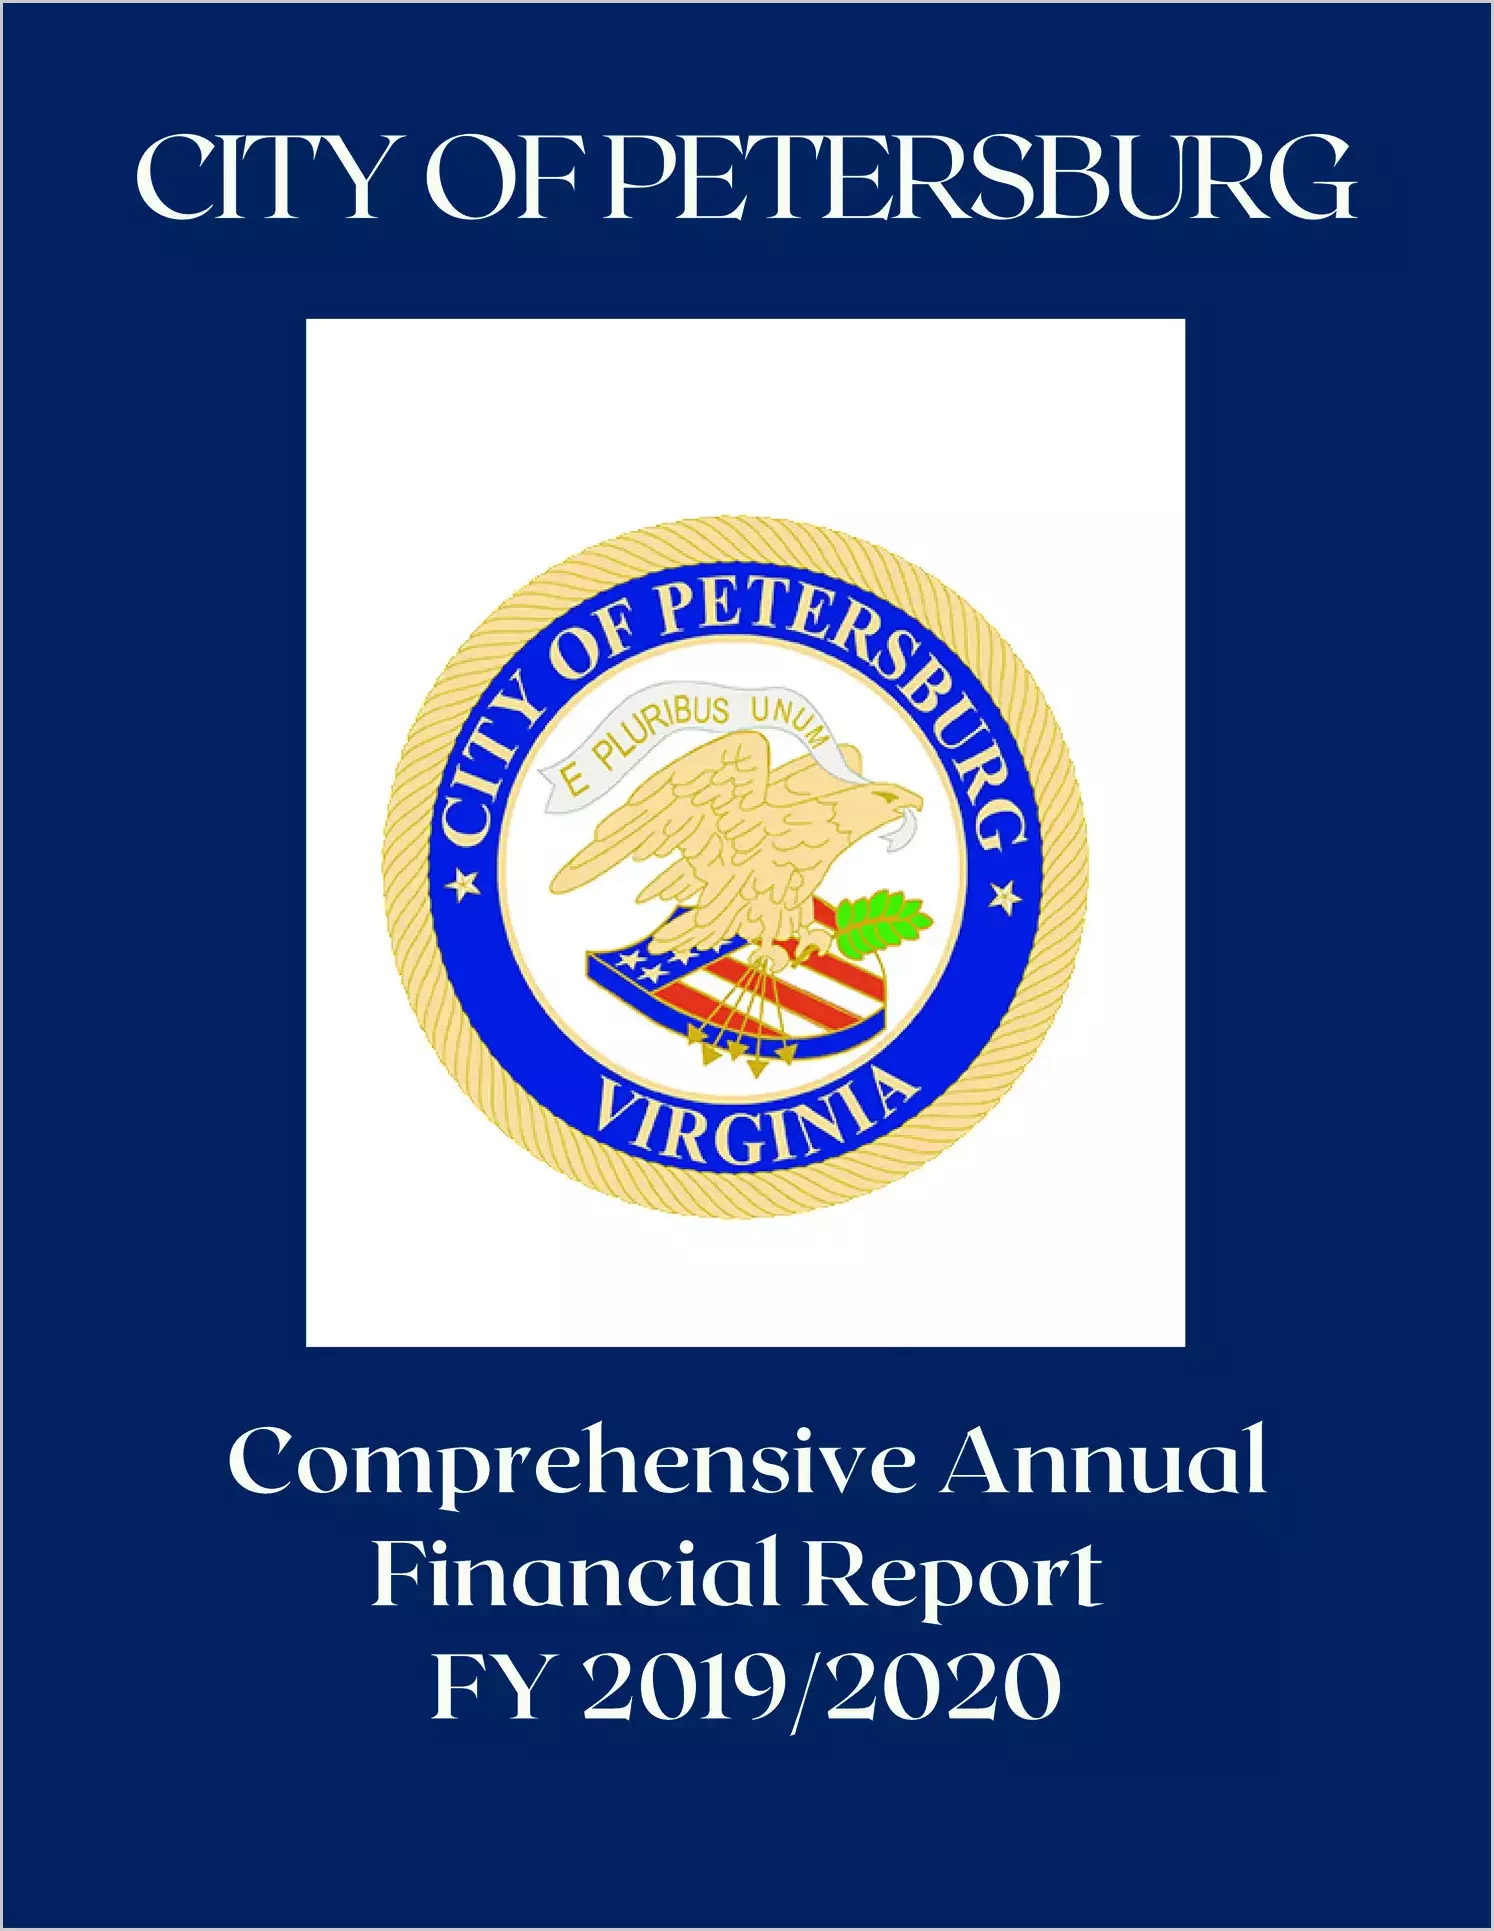 2020 Annual Financial Report for City of Petersburg